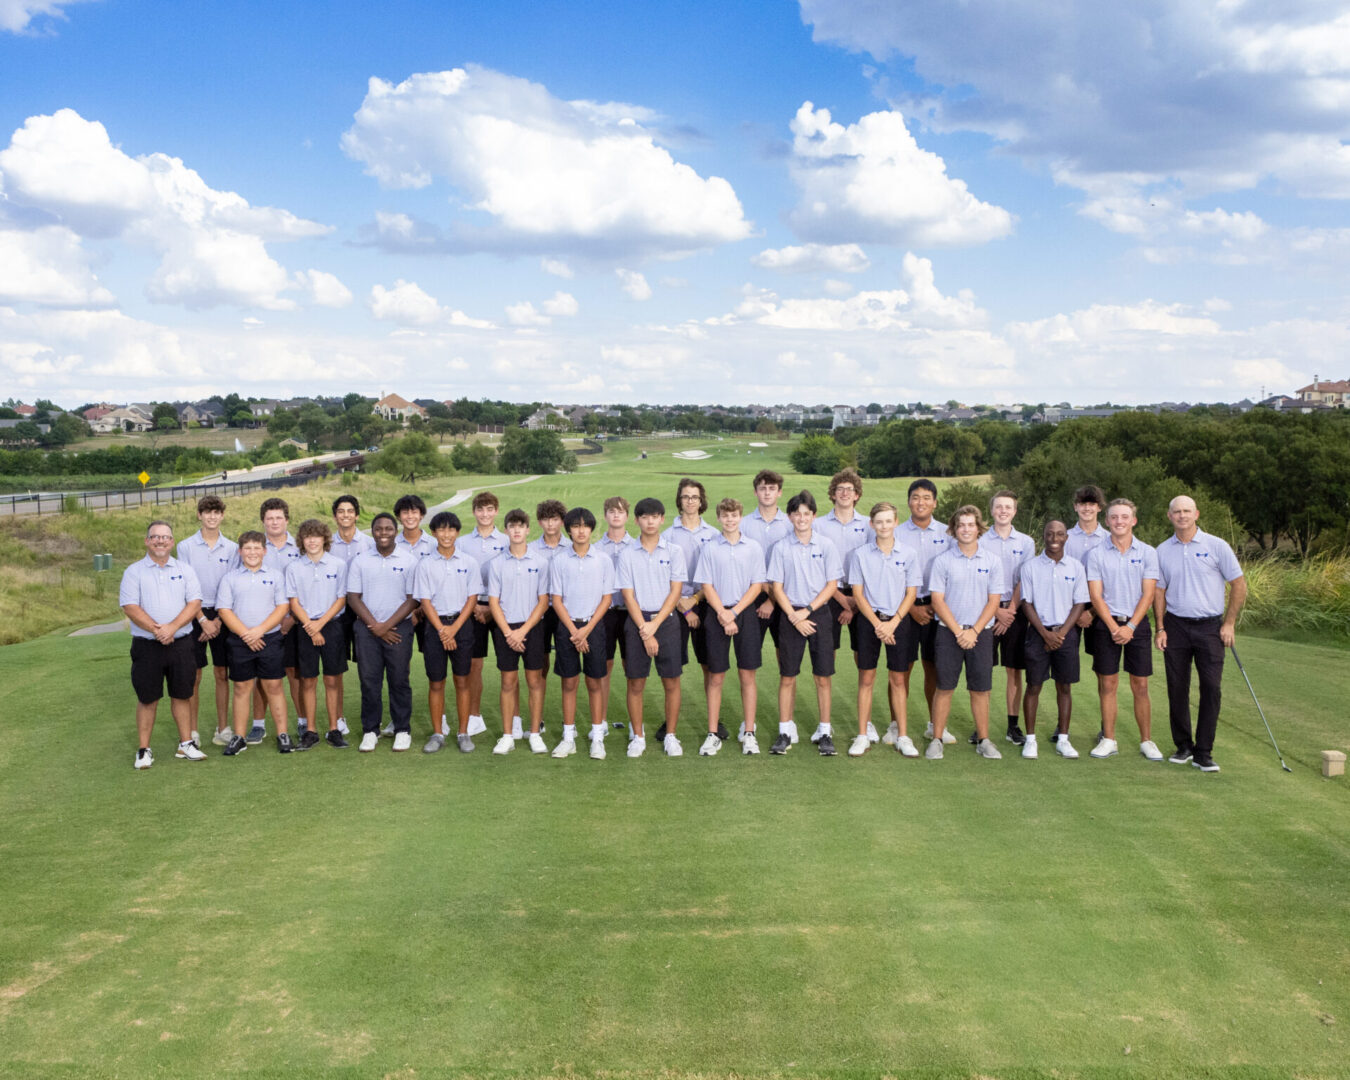 golf team of boys standing together for a picture